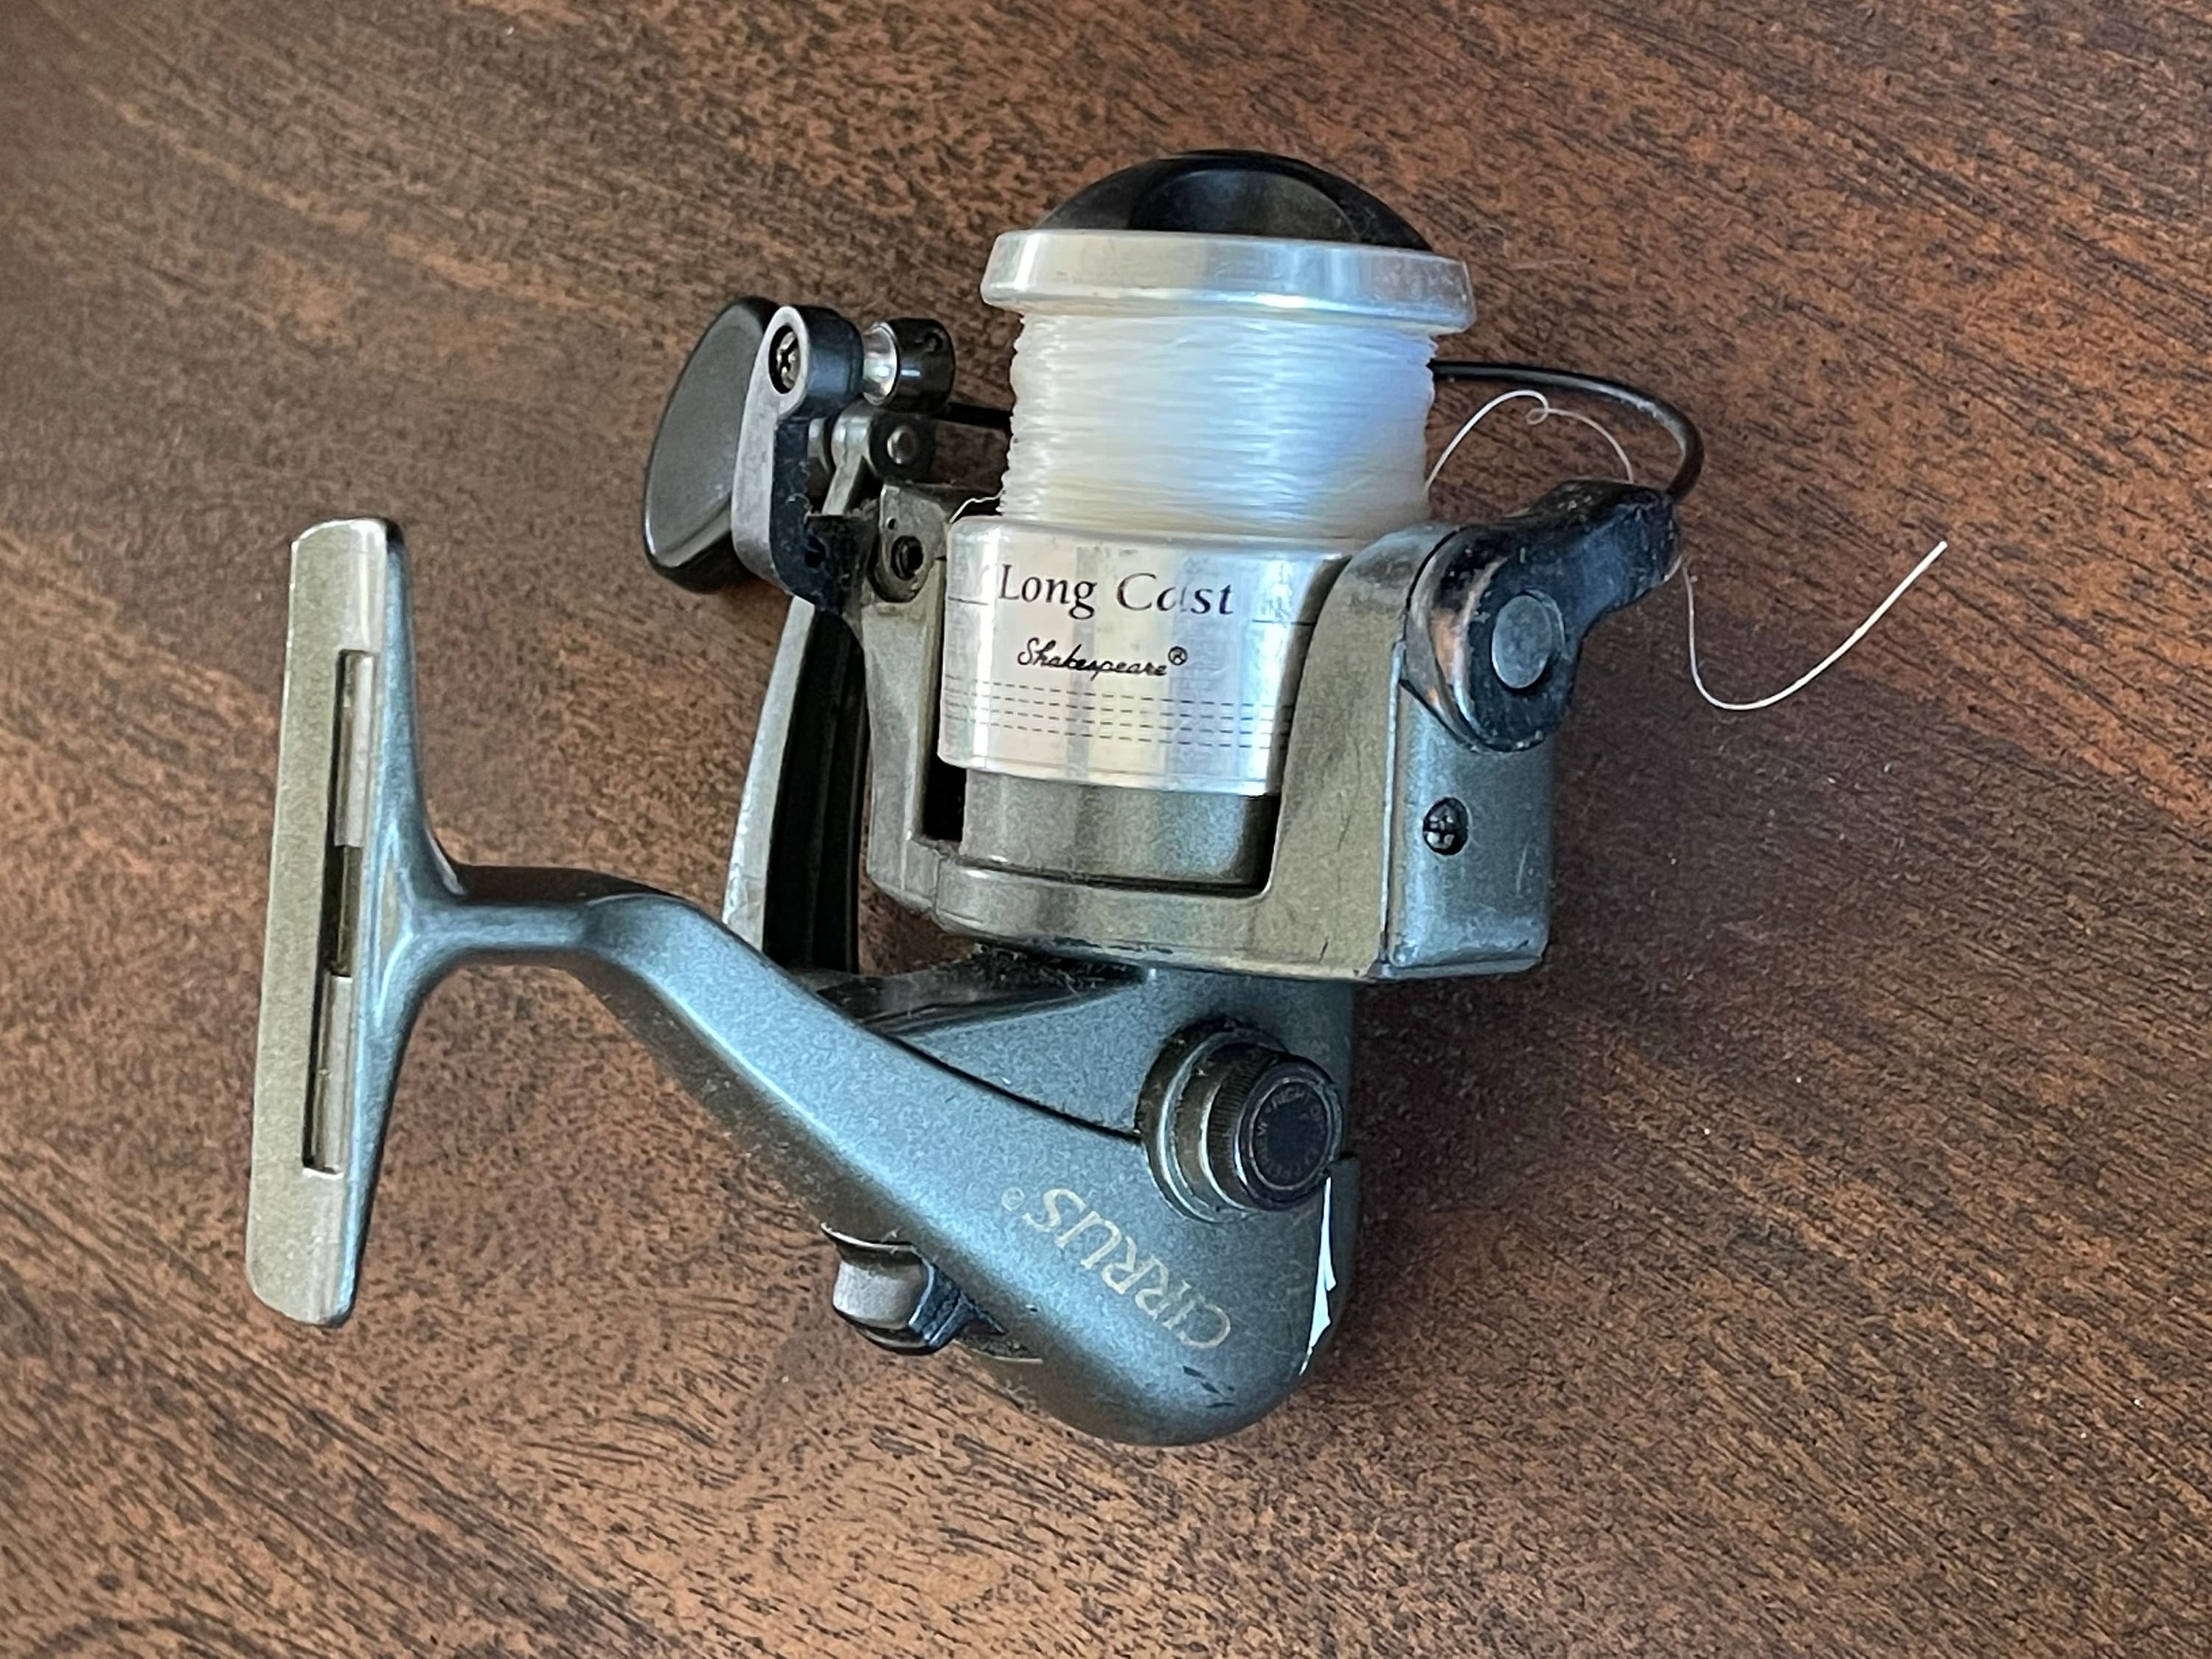 Vintage Shakespeare Cirrus ALX CS-35, Long Cast Fishing Reel, Ball Bearing  / Right or Left Retrieve / Vintage Fishing Collectible / Mancave -   Canada